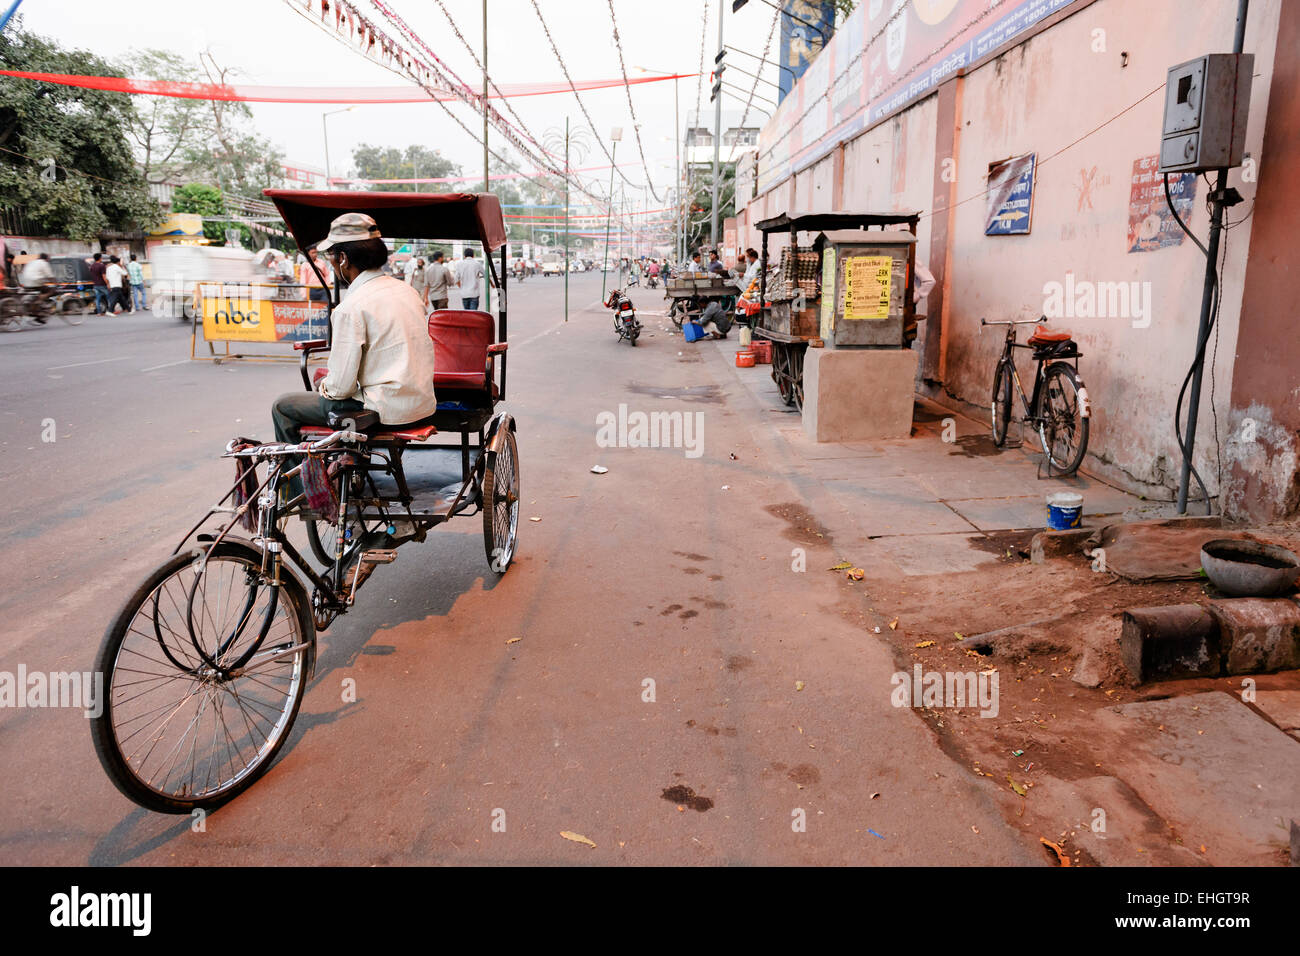 A rickshaw driver having a rest in the streets of Jaipur. Stock Photo